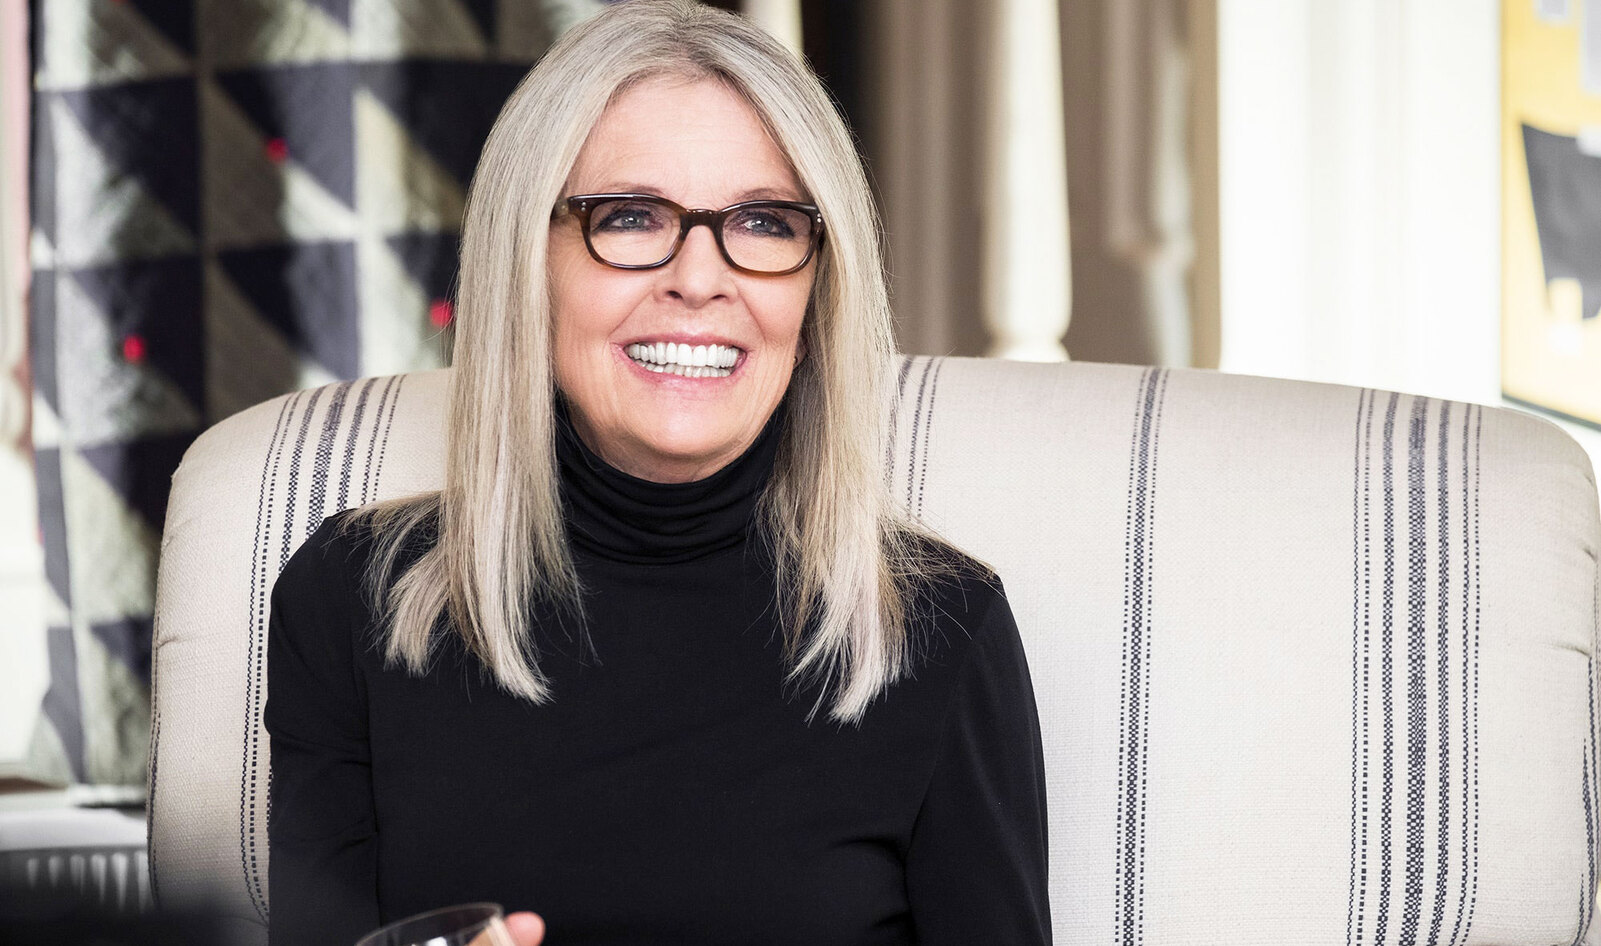 Diane Keaton Joins Fight to Stop Animal Cruelty Exposed by <i>Tiger King</i>